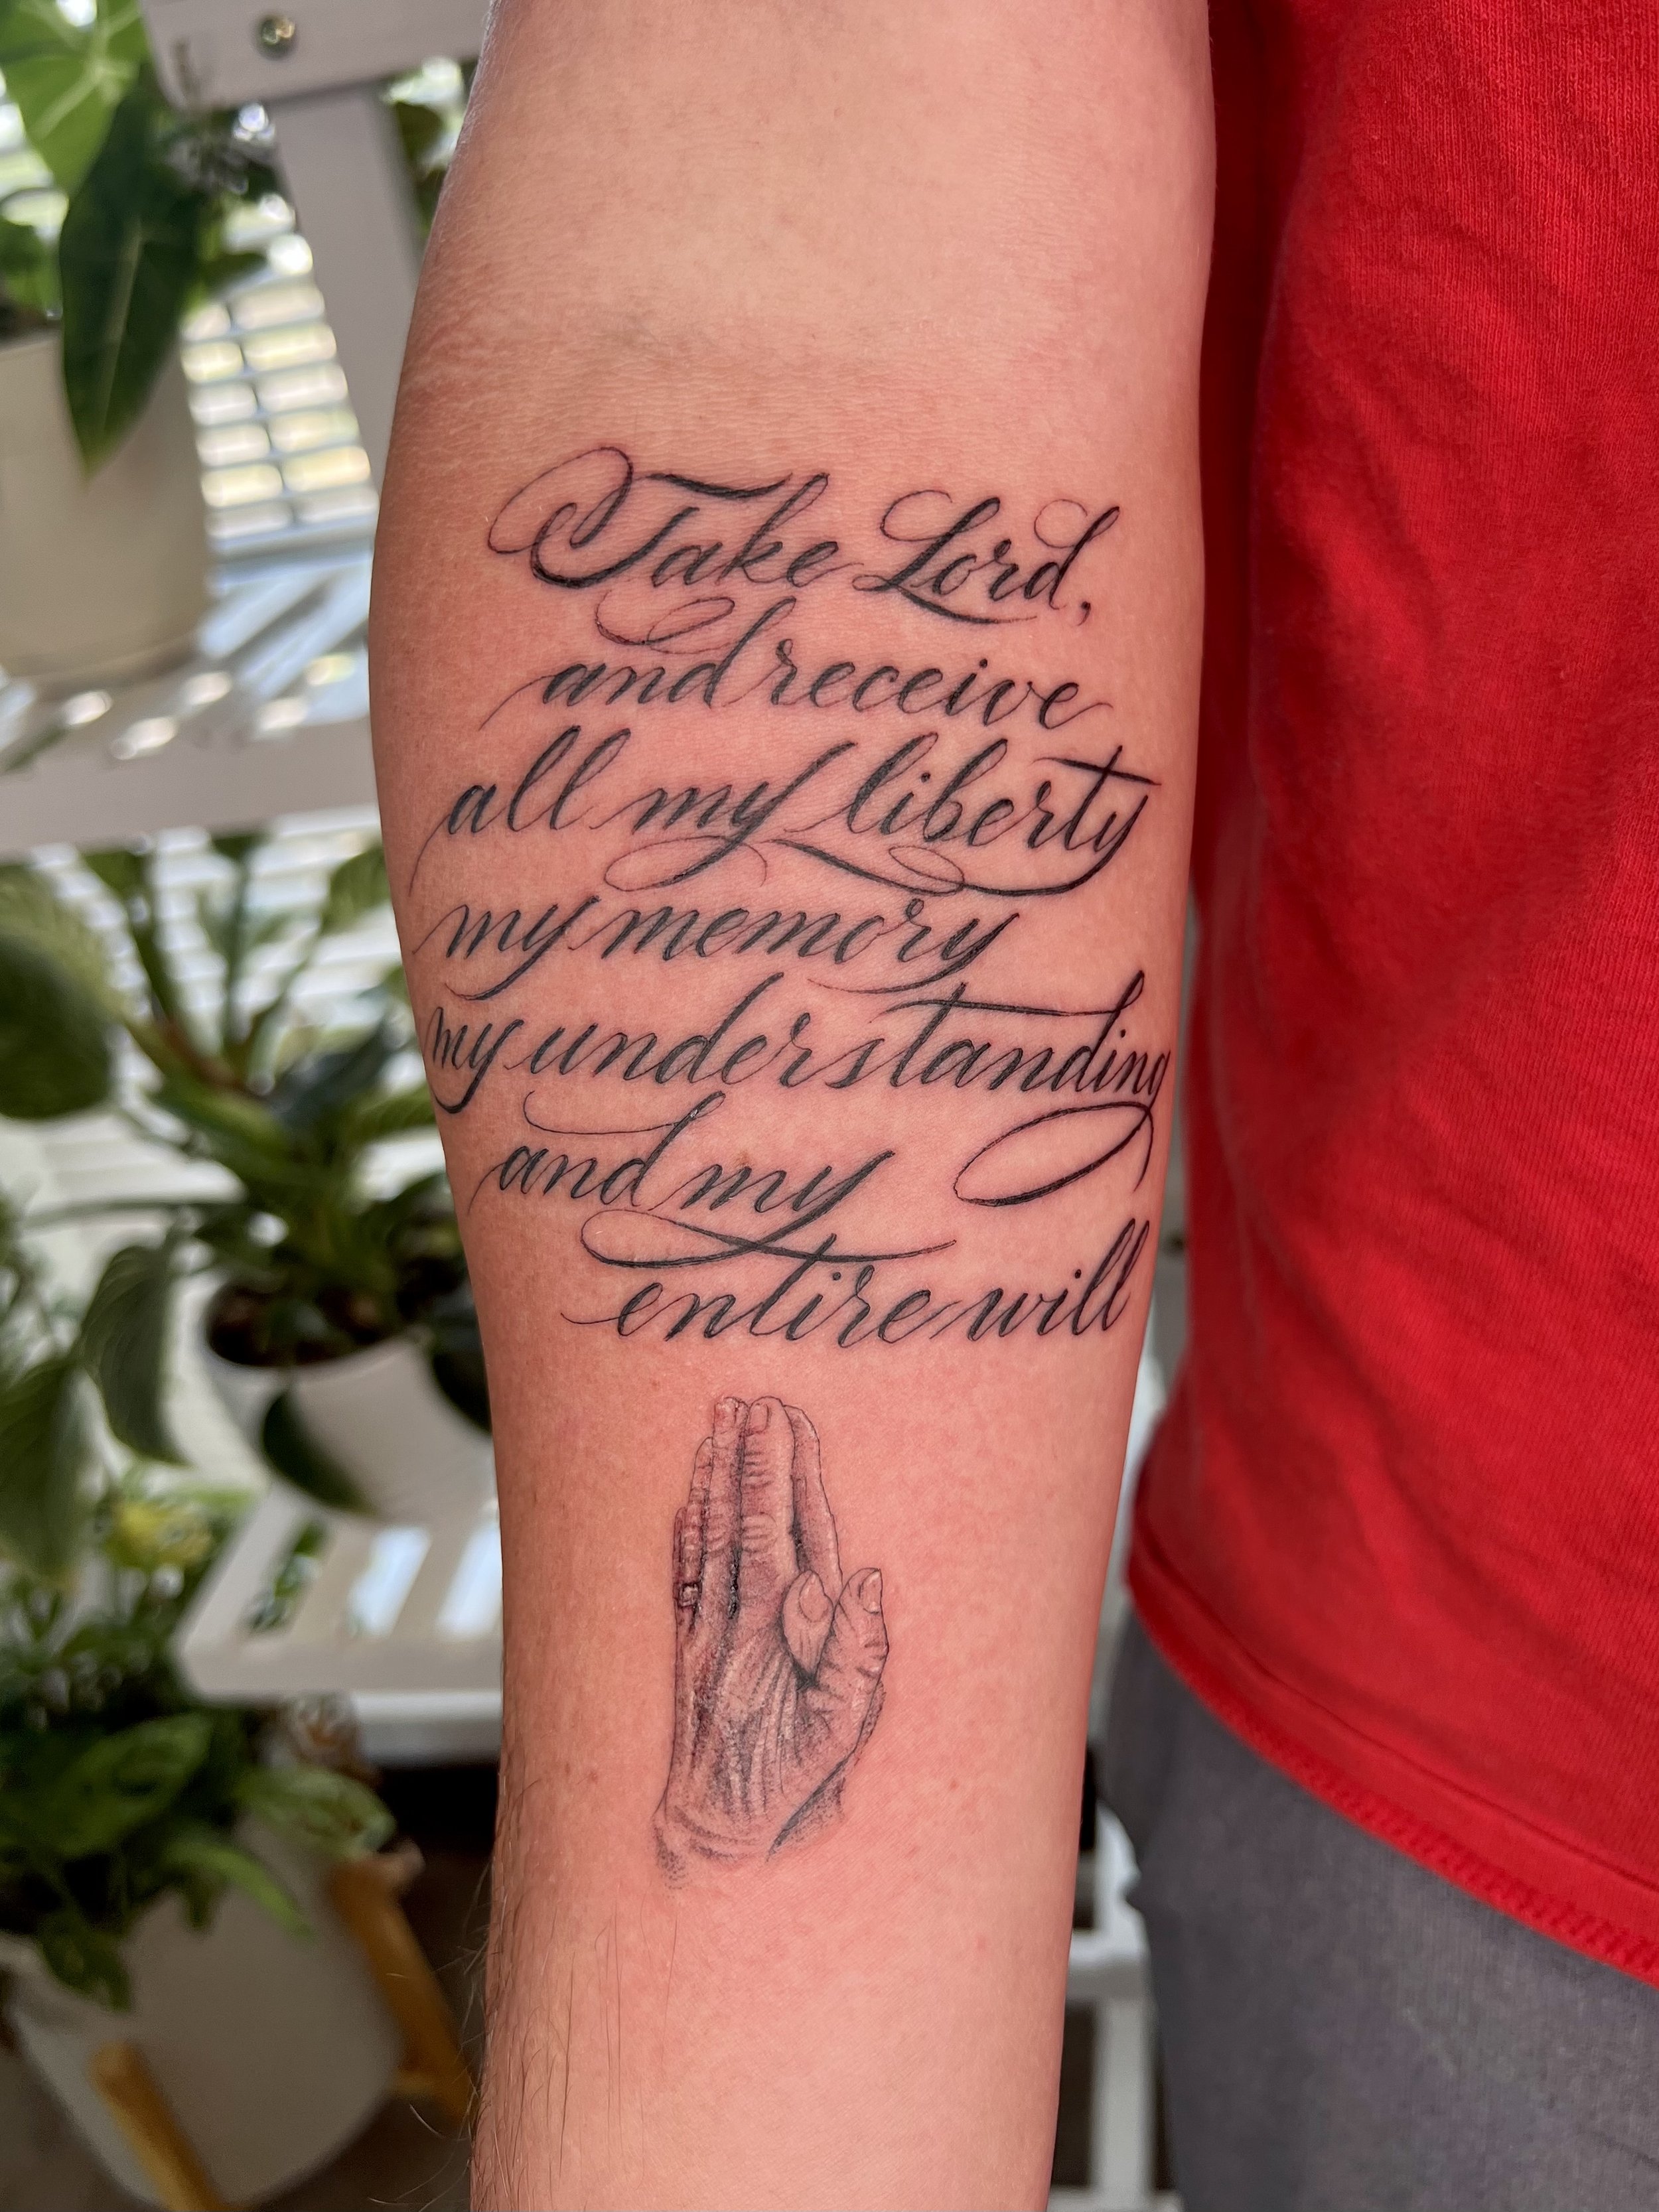 Claudia Fedorovici on Twitter Fineline Lettering Tattoo lettering  letteringtattoo fineline finelinetattoo linework lineworktattoo  amsterdamtattoo dermadonna ascetictattoo claudiafedoroviciart  finetattooing httpstcoi6B8twHesy  Twitter